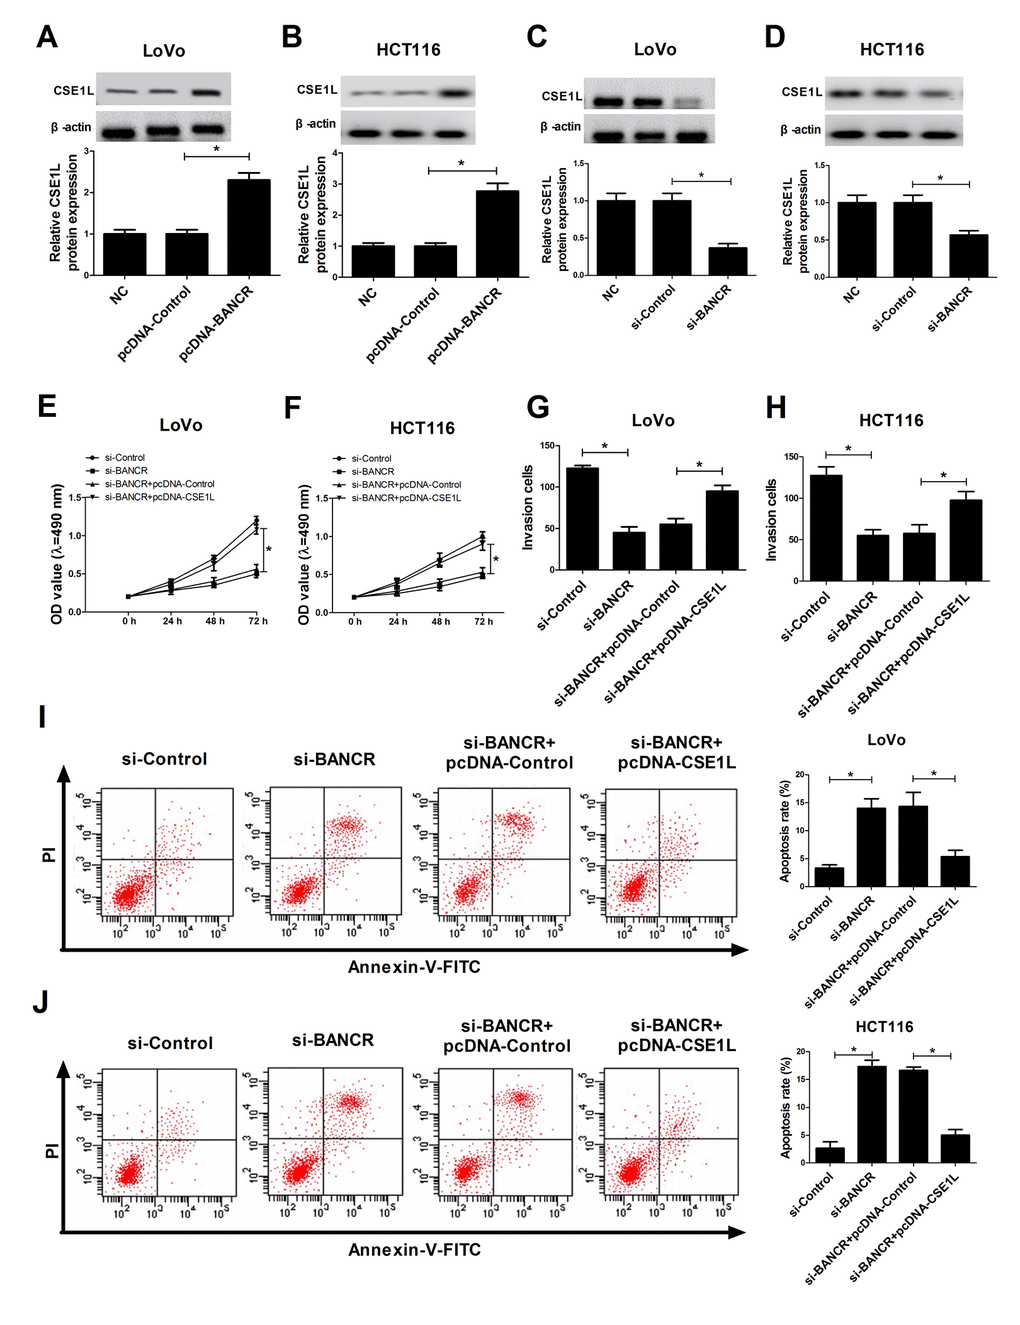 CSE1L overexpression abrogated si-BANCR-mediated anti-invasion, anti-proliferation and pro-apoptosis effects in CRC cells. (A and B) The effect of BANCR overexpression on CSE1 L protein level was detected in LoVo and HCT116 cells. (C and D) The effect of BANCR knockdown on CSE1 L protein expression was measured in LoVo and HCT116 cells. (E-J) LoVo and HCT116 cells were transfected with si-Control, si-BANCR, si-BANCR+pcDNA-Control, si-BANCR+pcDNA-CSE1L, followed by the determination of cell viability (E and F), invasion capacity (G and H) and apoptosis rate (I and J). *P 